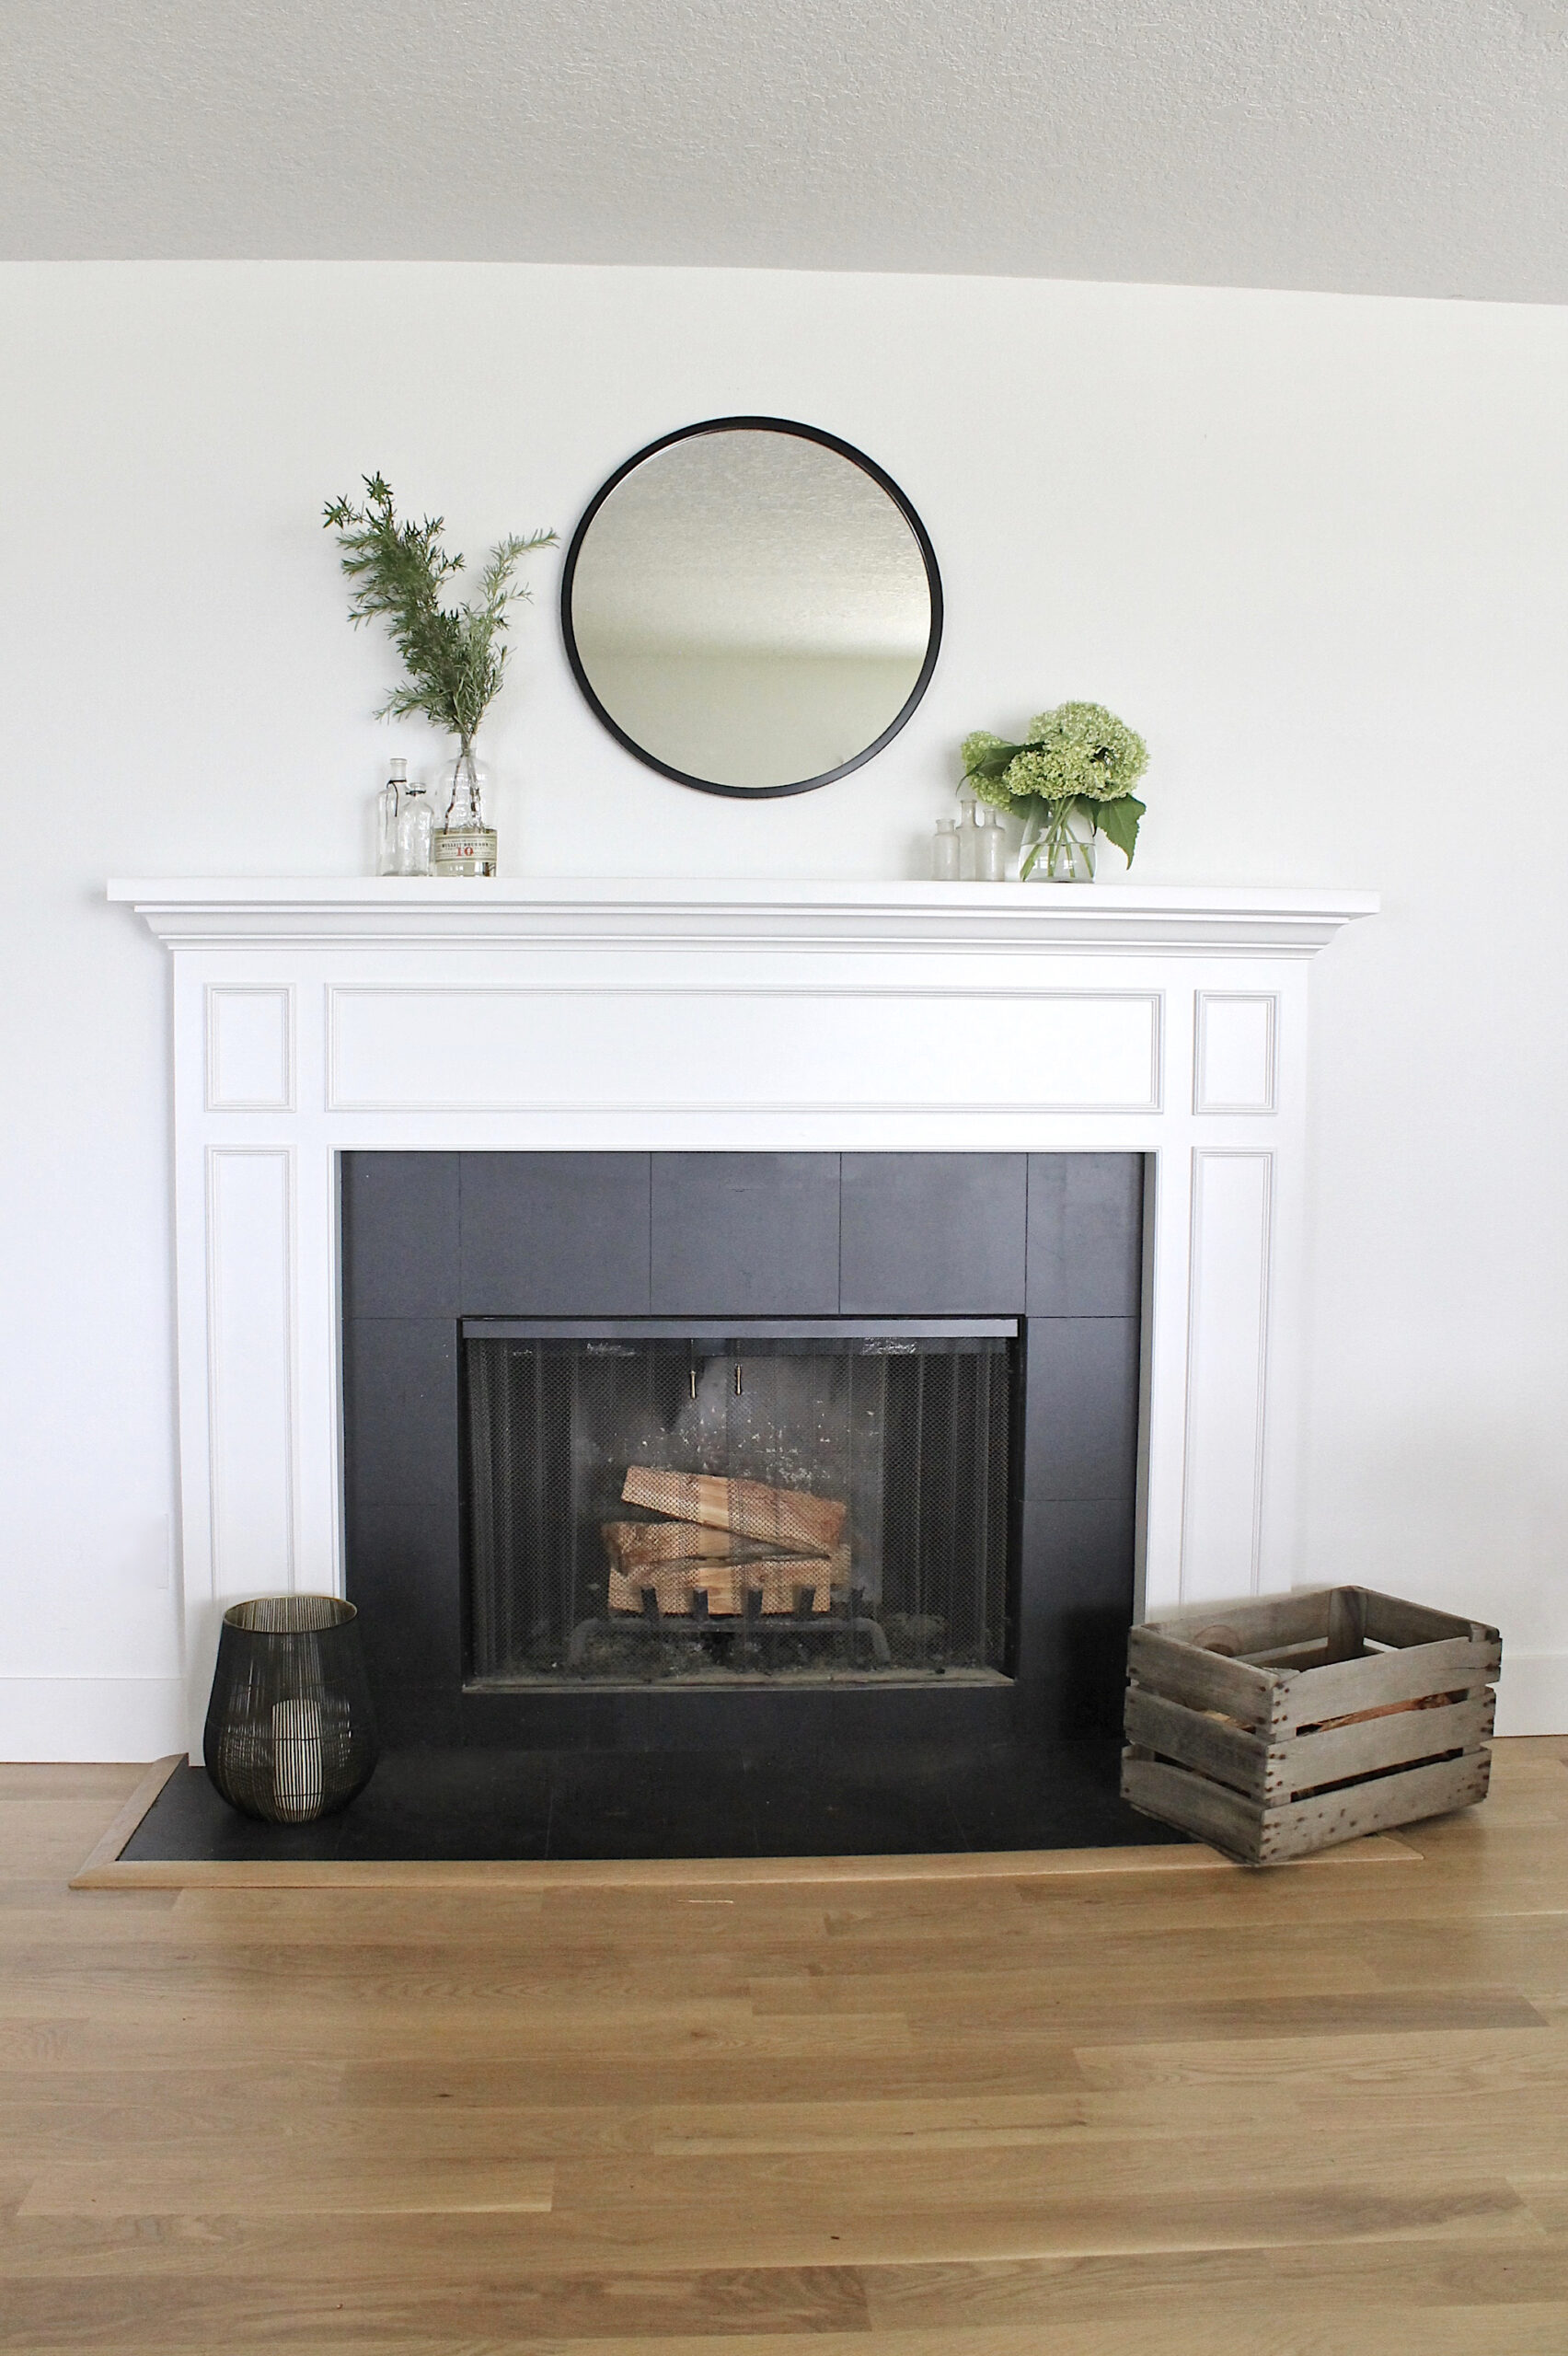 How To Paint A Ceramic Tile Fireplace, How To Tile Over Slate Fireplace Surround